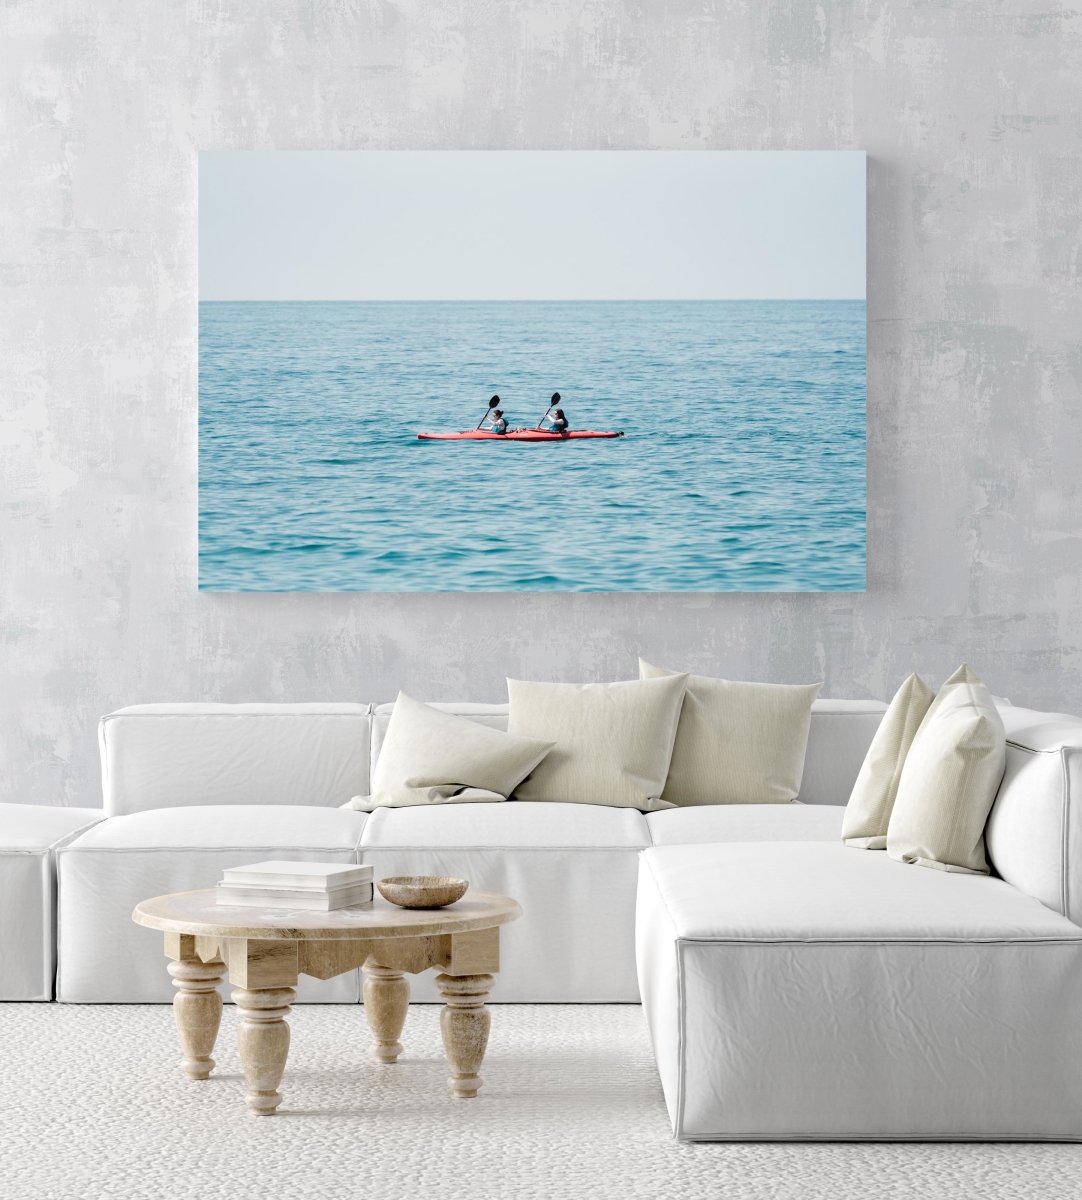 Two women paddling a red kayak in Cinque Terre in an acrylic/perspex frame